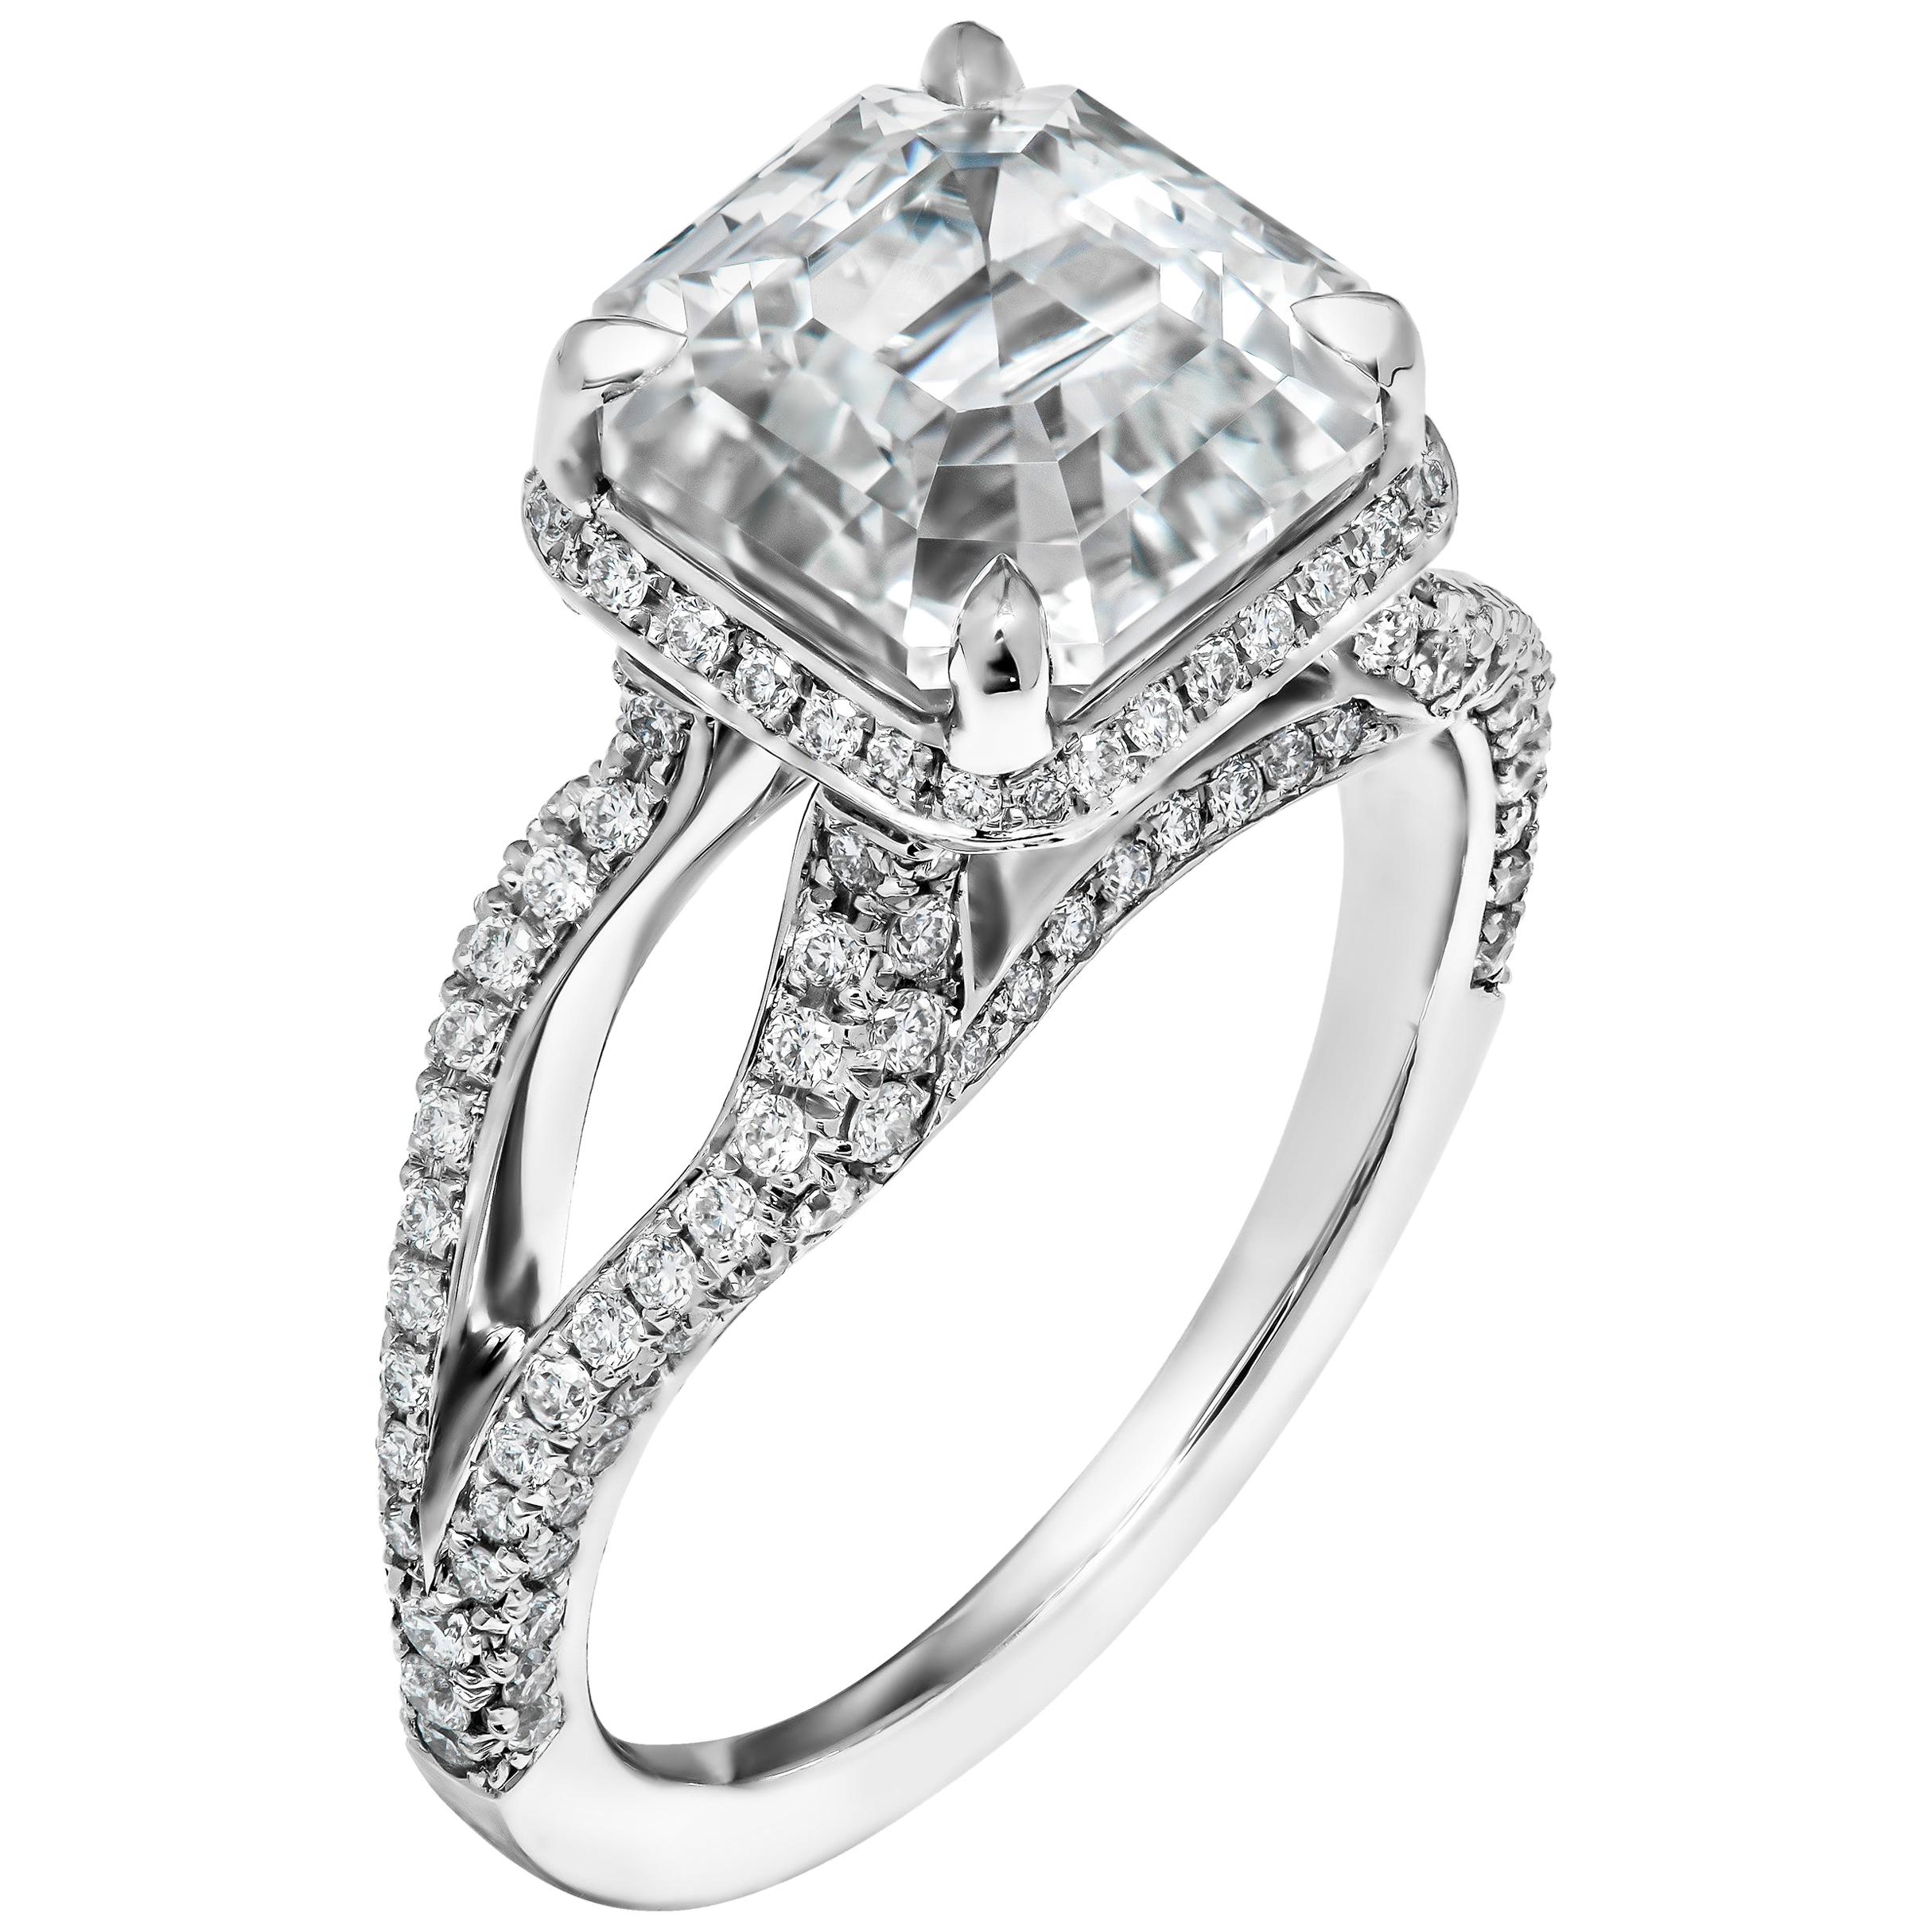 GIA Certified Ring with 4.78 Carat White Sapphire